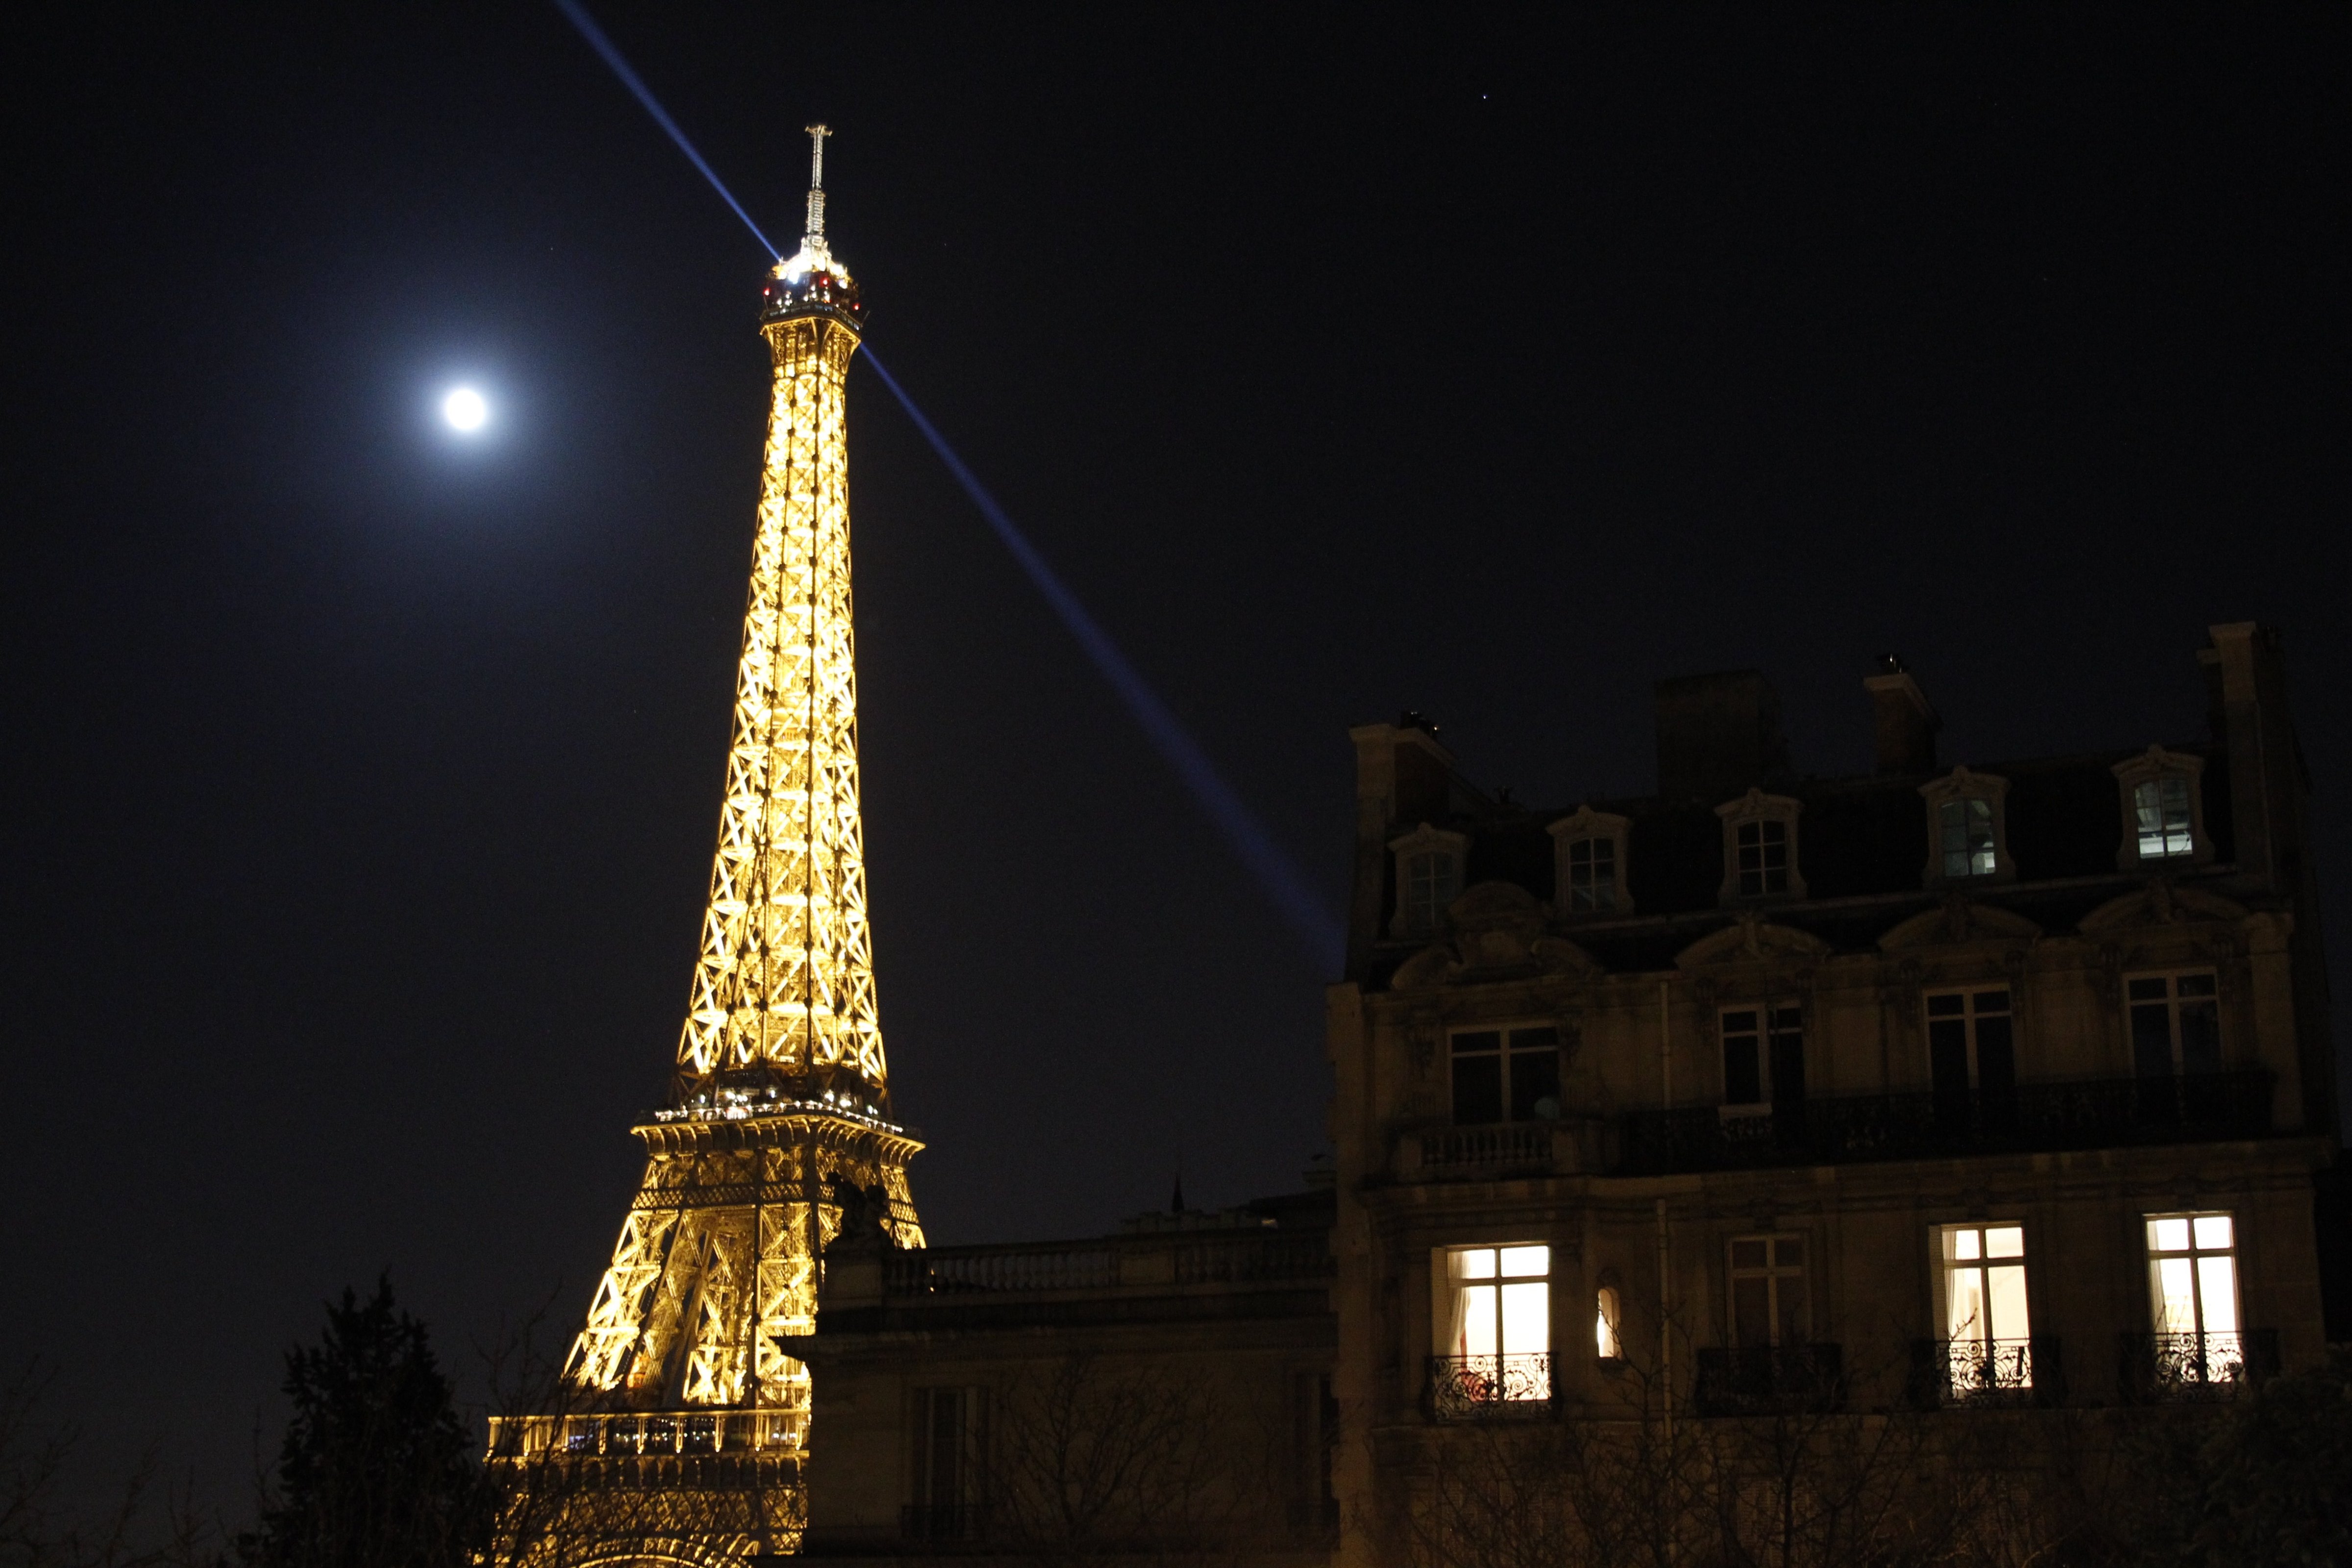 The Eiffel Tower in Paris on Feb. 13, 2014. (Ludovic Marin—AFP/Getty Images)